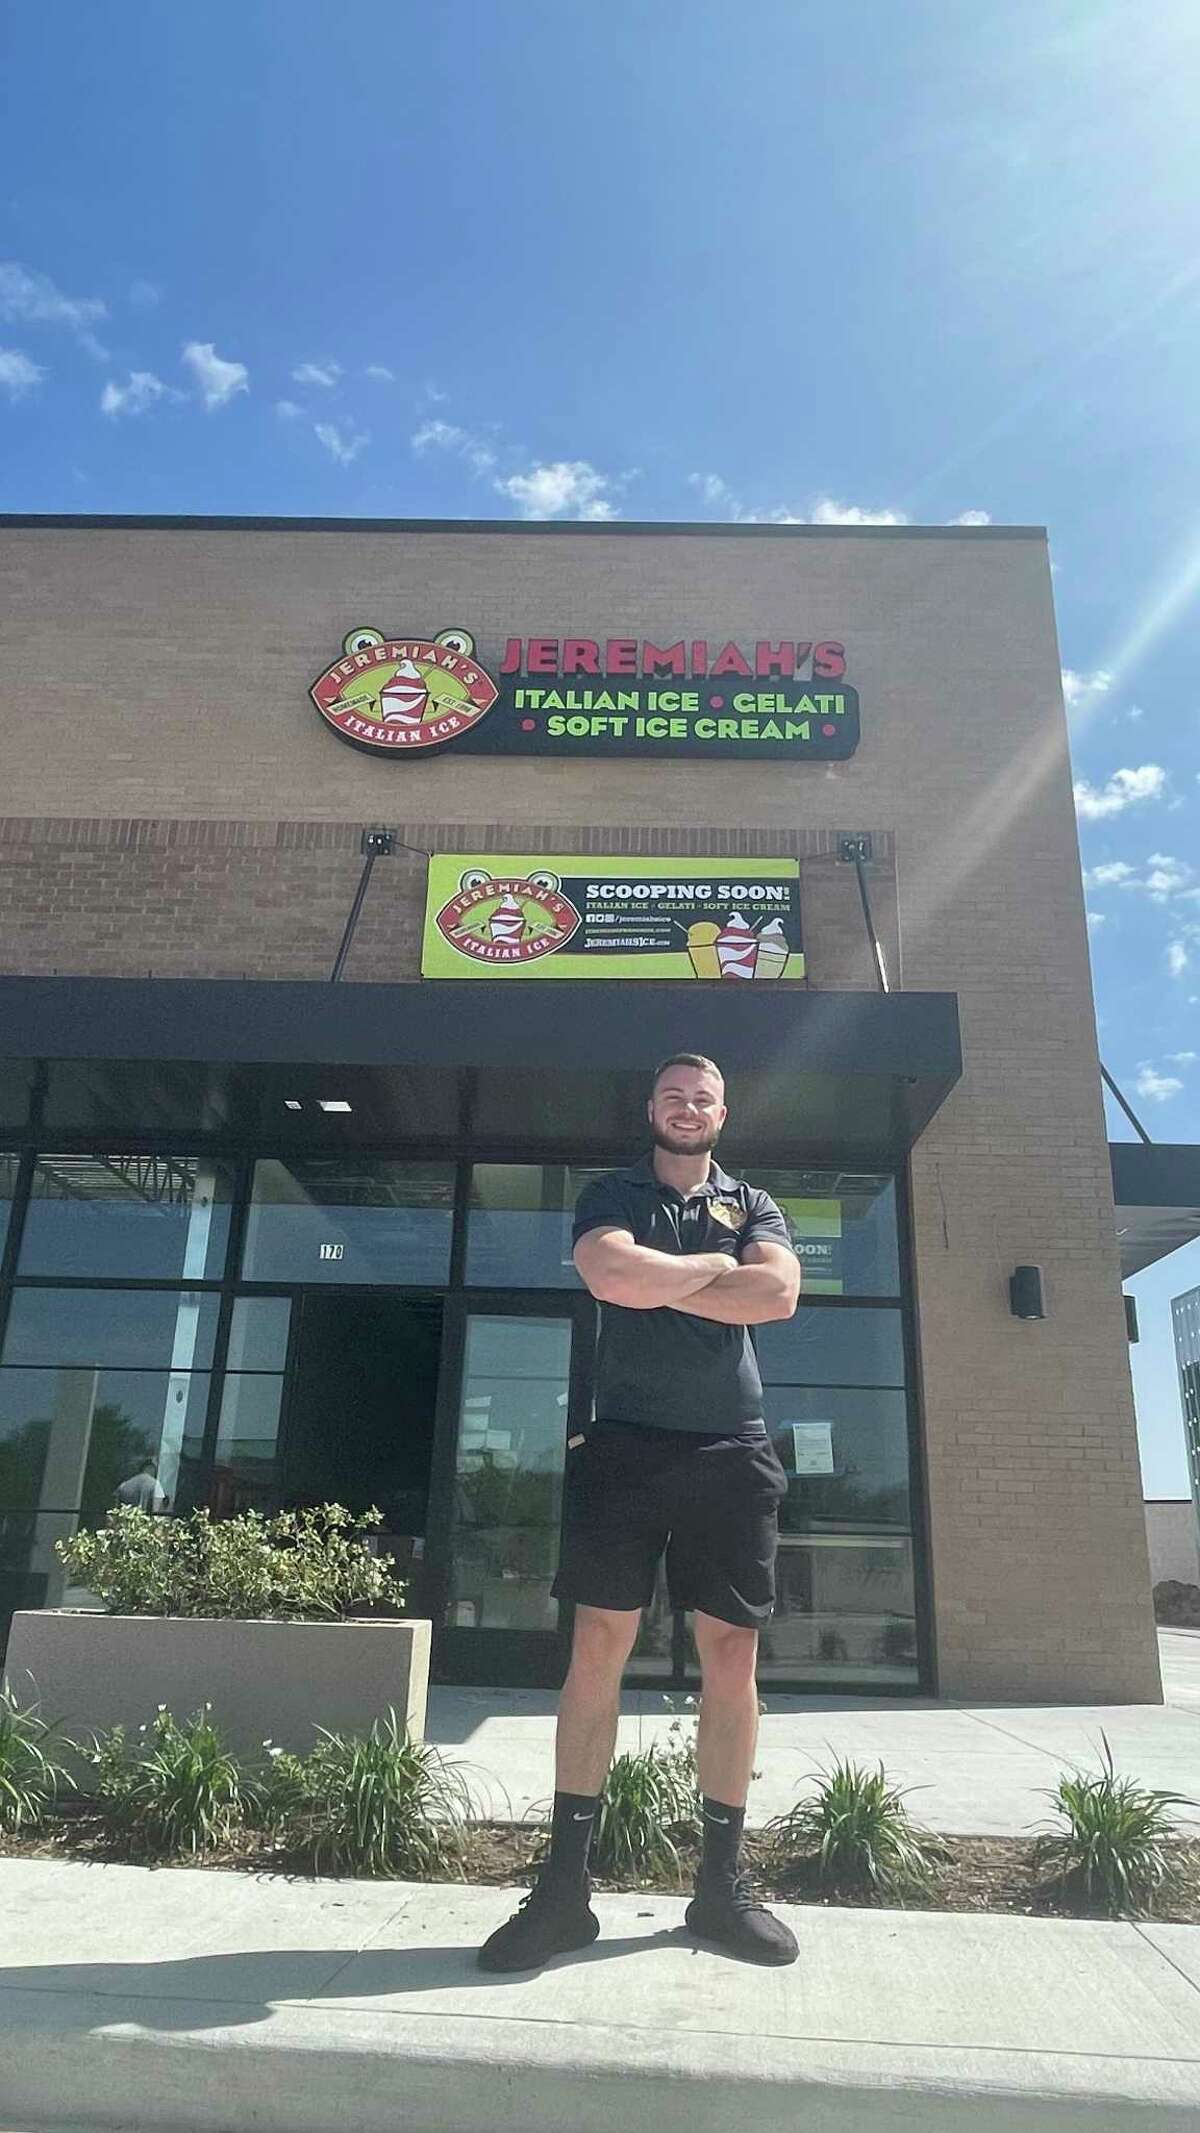 Sam Cleavenger, the Houston area representative for Jeremiah’s Italian Ice and the manager at the chain’s Pearland location, started working at the company two days after his 16th birthday.